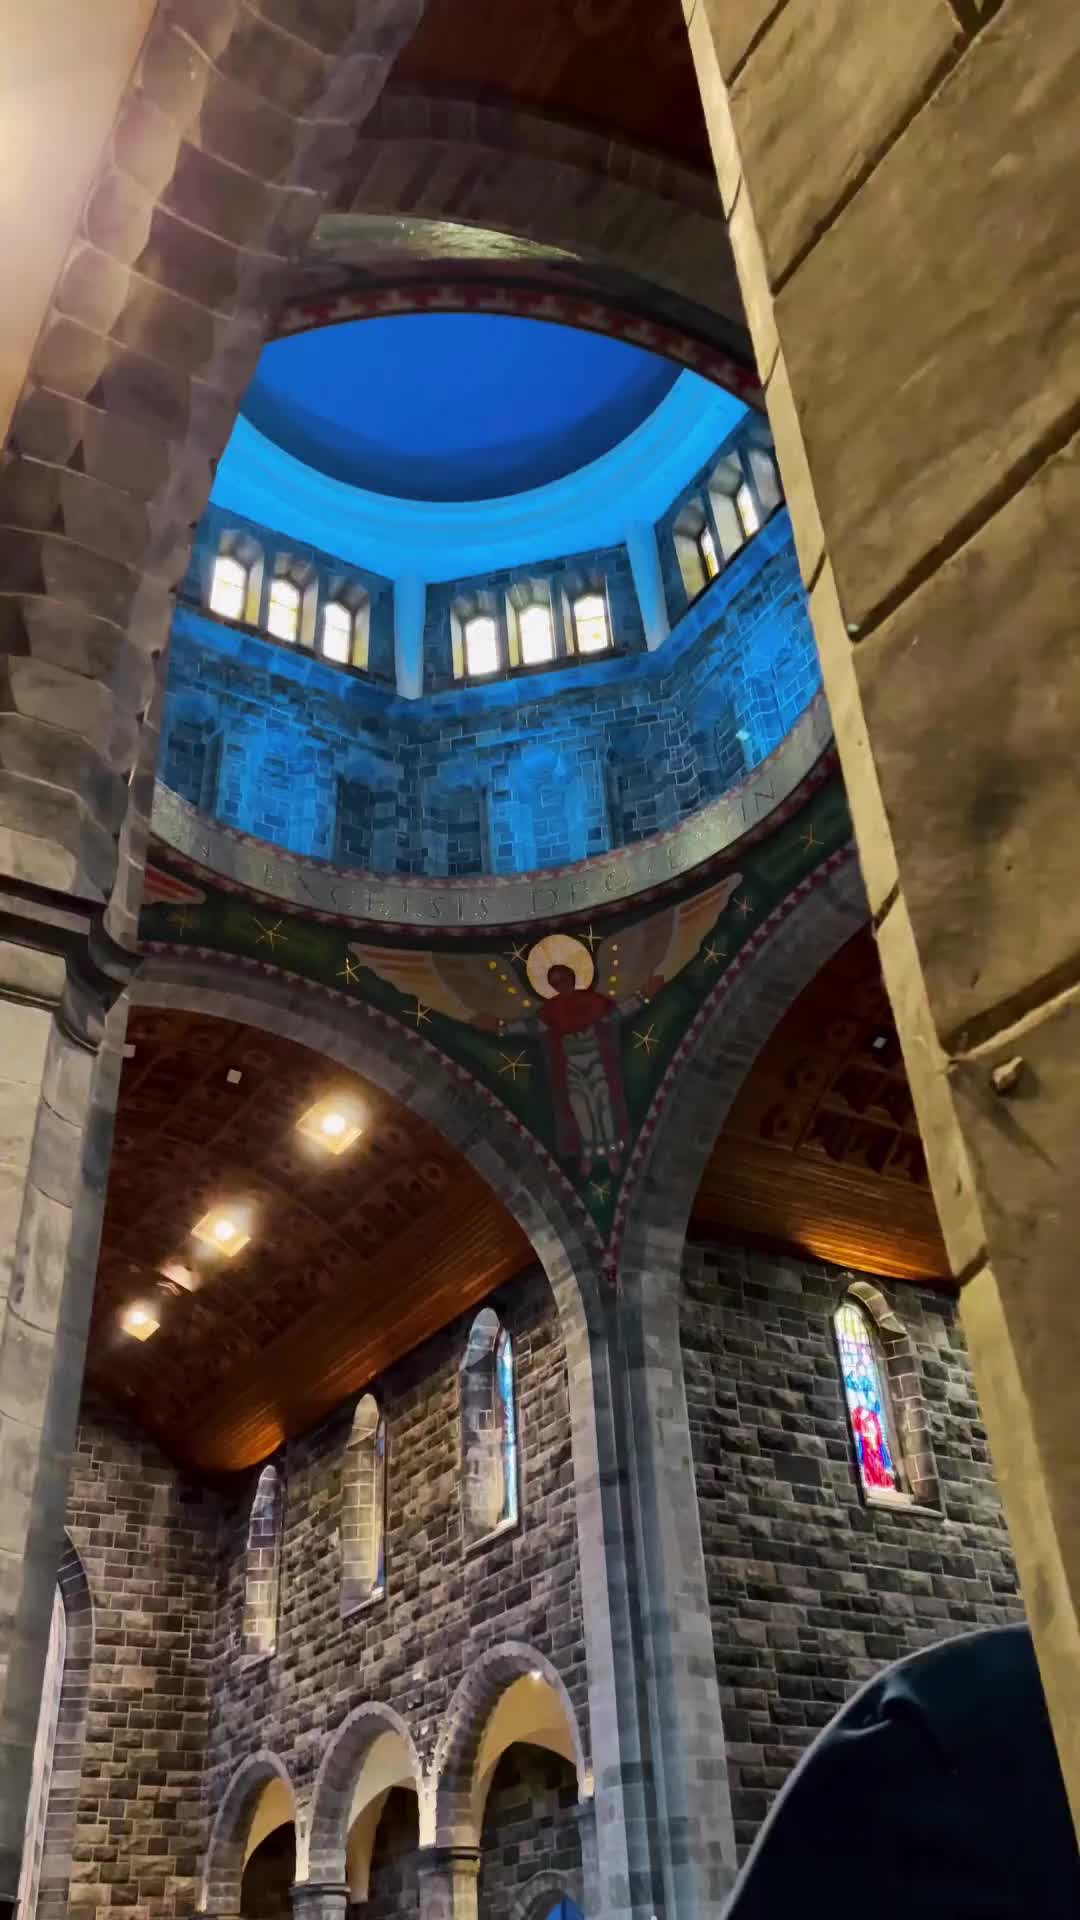 Majesty of Galway Cathedral: A Visual Masterpiece